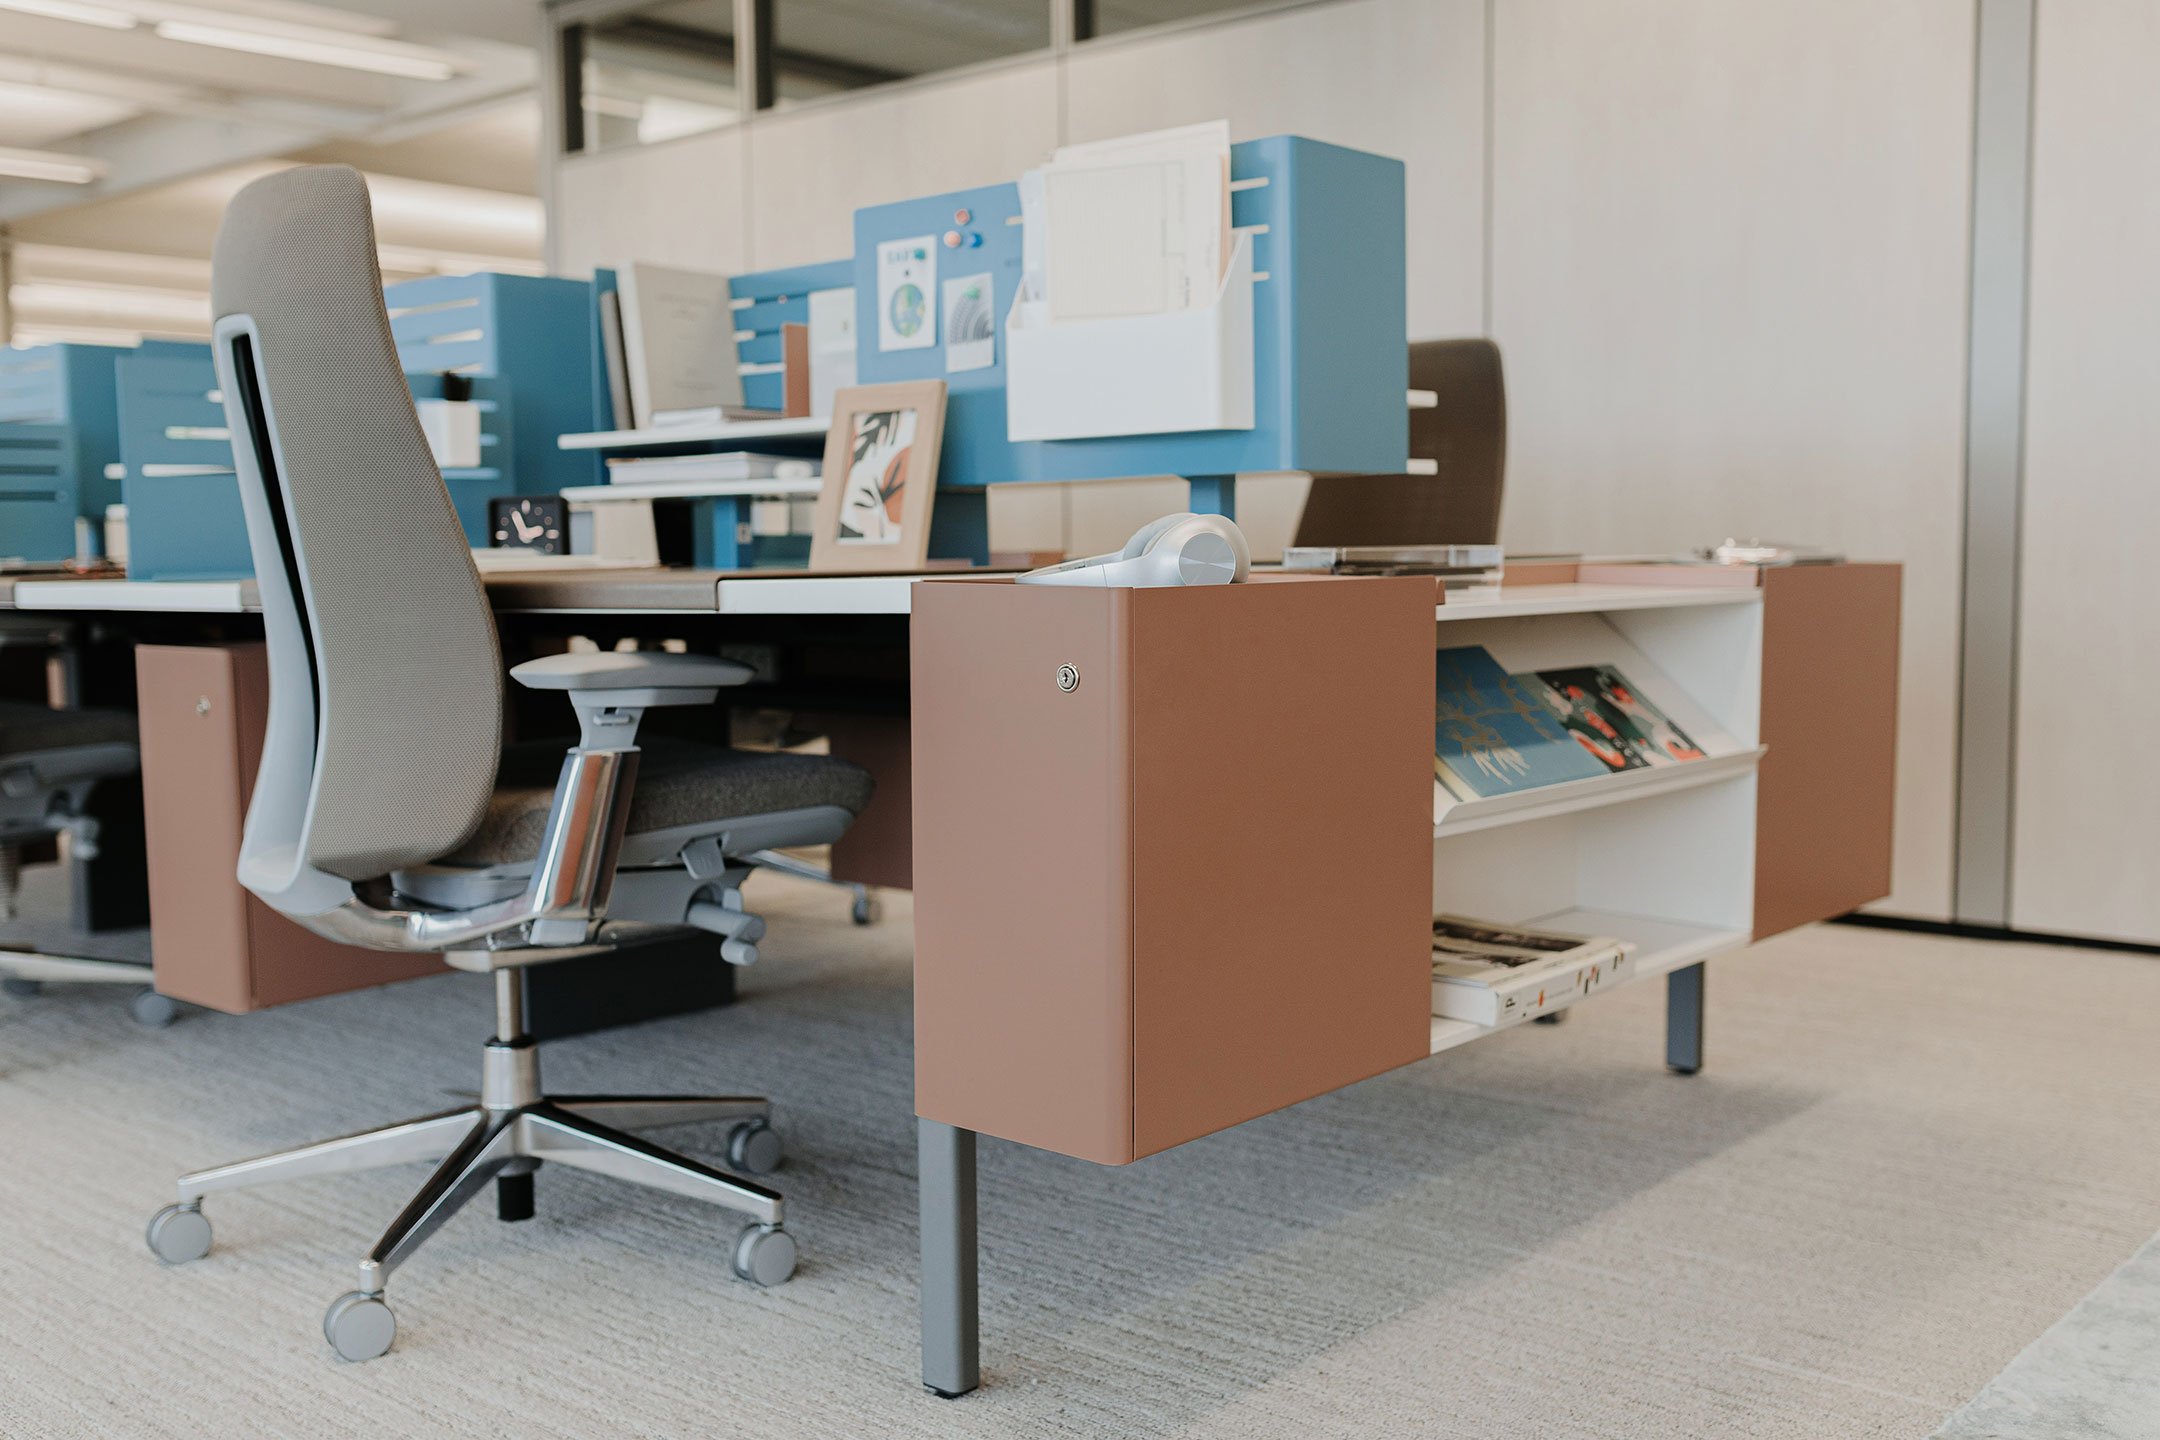 Haworth Intuity Workspace divider in blue color seperating desks in office space with fern chairs at them 